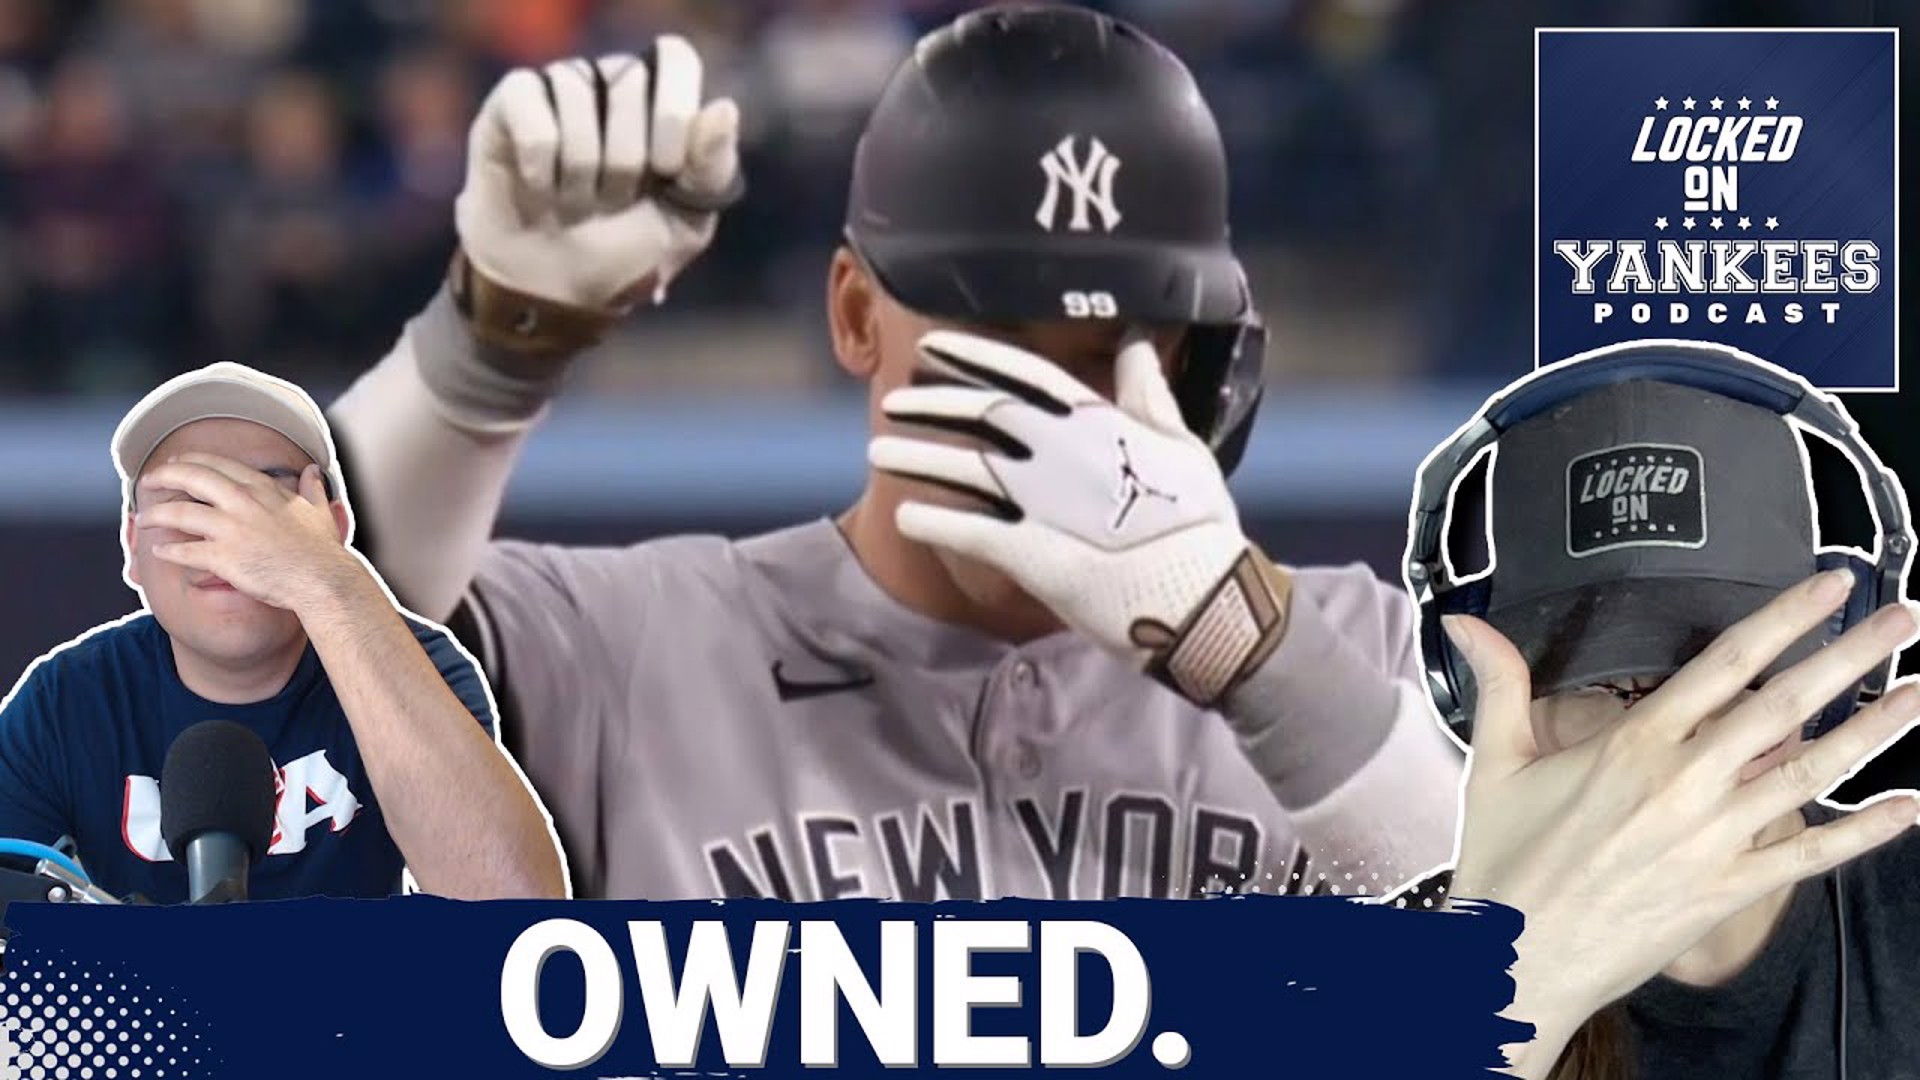 The New York Yankees beat the Toronto Blue Jays, 4-2 on Thursday night to win their series three out of four.